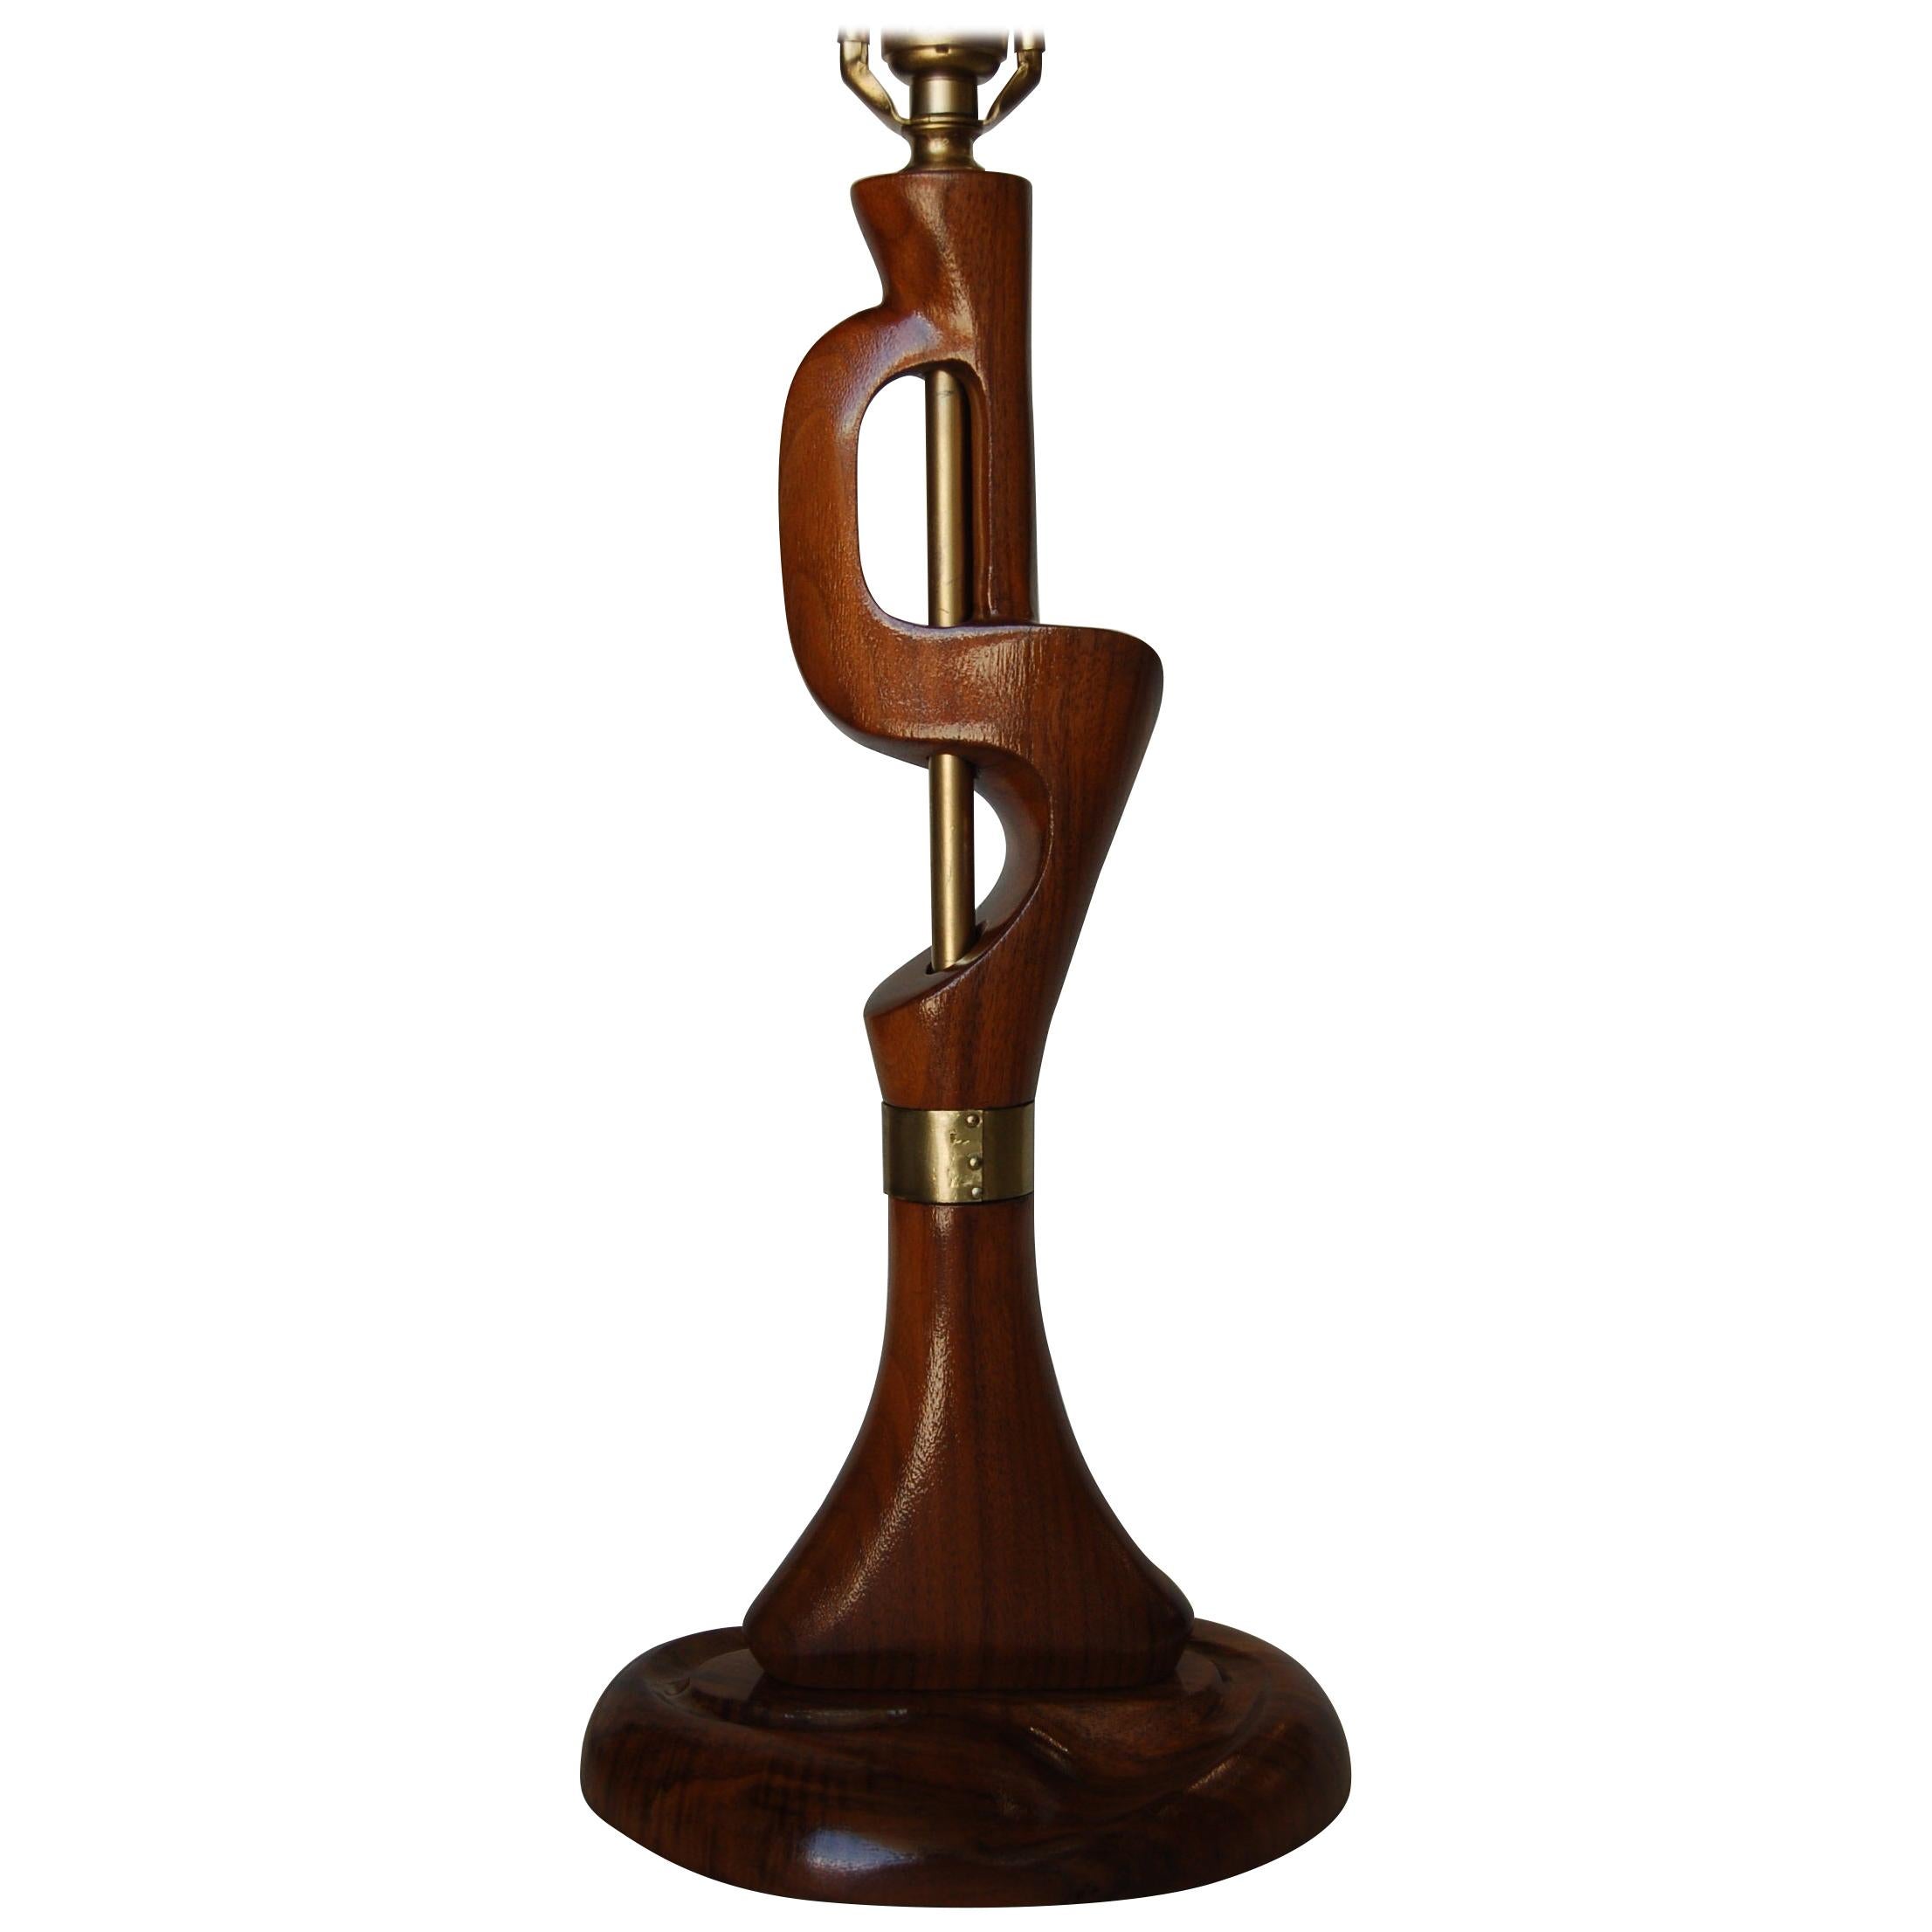 Freeform Abstract Carved Mahogany Table Lamp with Brass Accents, Jascha Heifetz